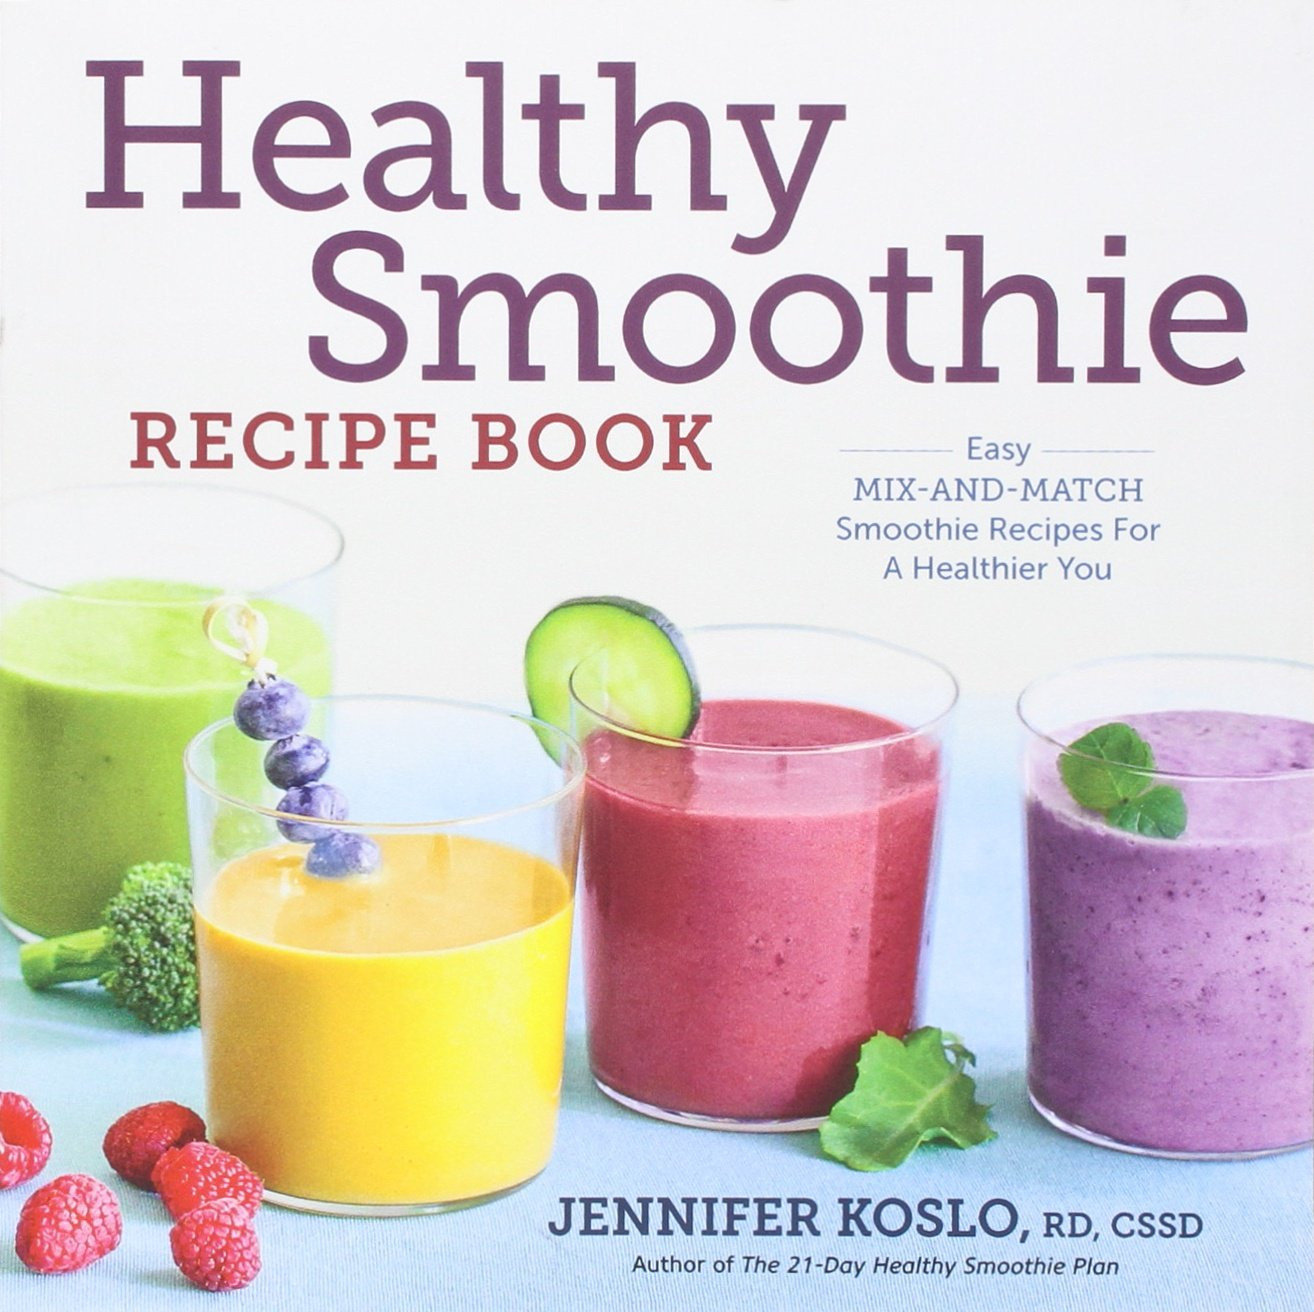 Healthy Smoothies Recipes
 Cheapest copy of Healthy Smoothie Recipe Book Easy Mix